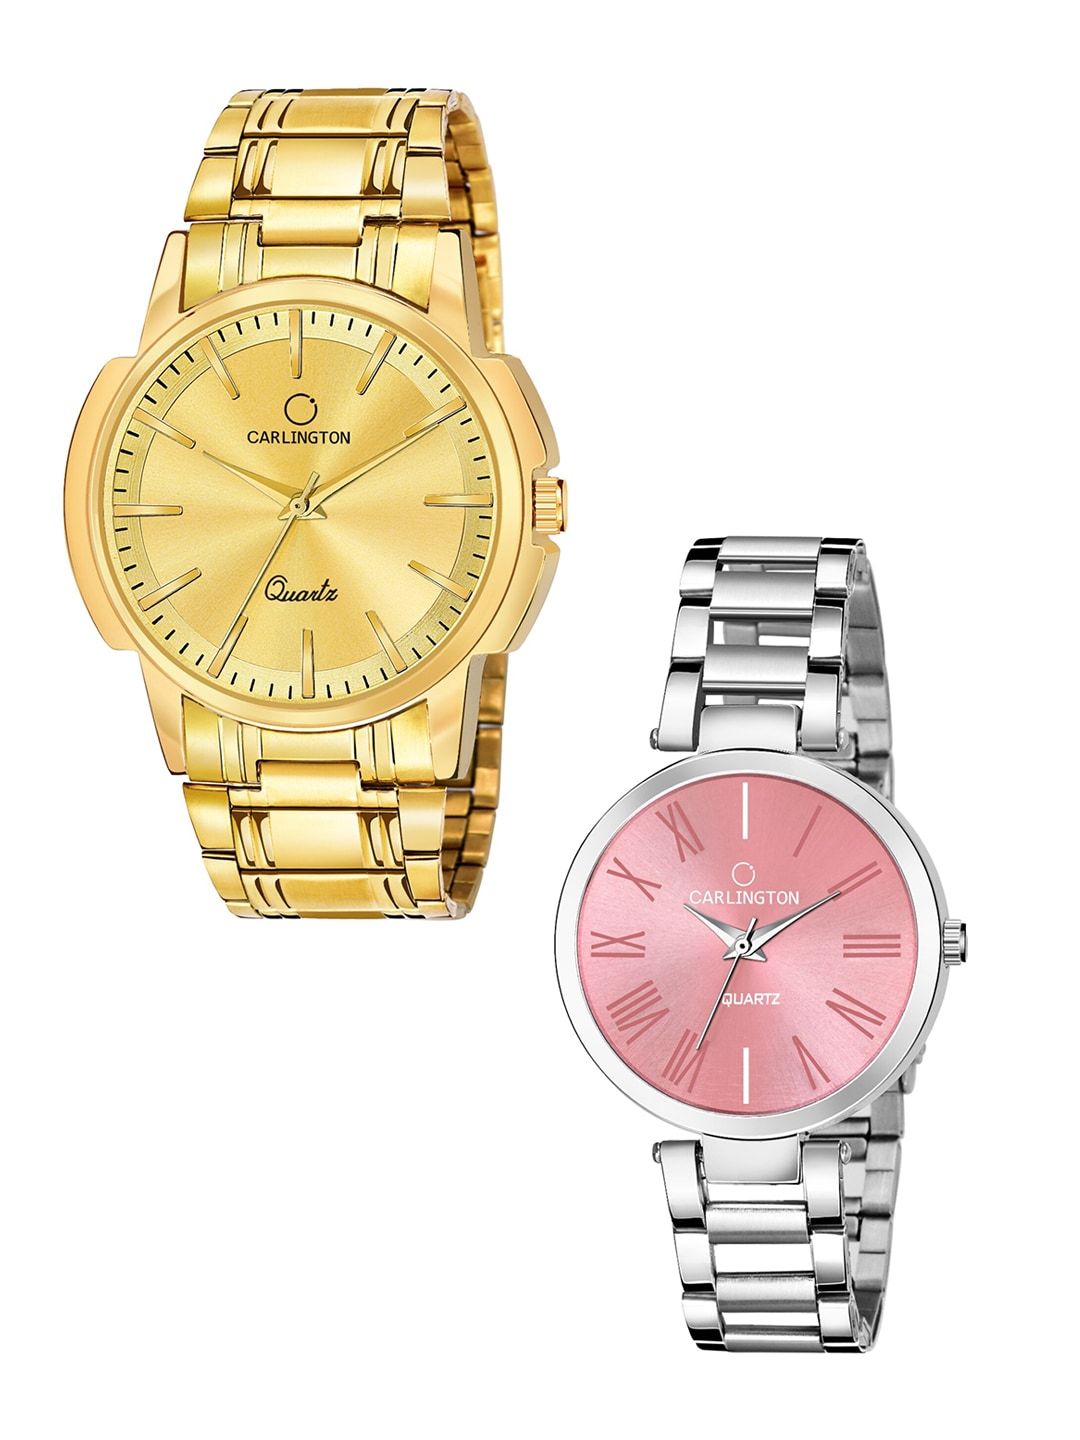 CARLINGTON Unisex Pack of 2 Analogue Watches Combo CT-6110GG and 112 Pink Price in India